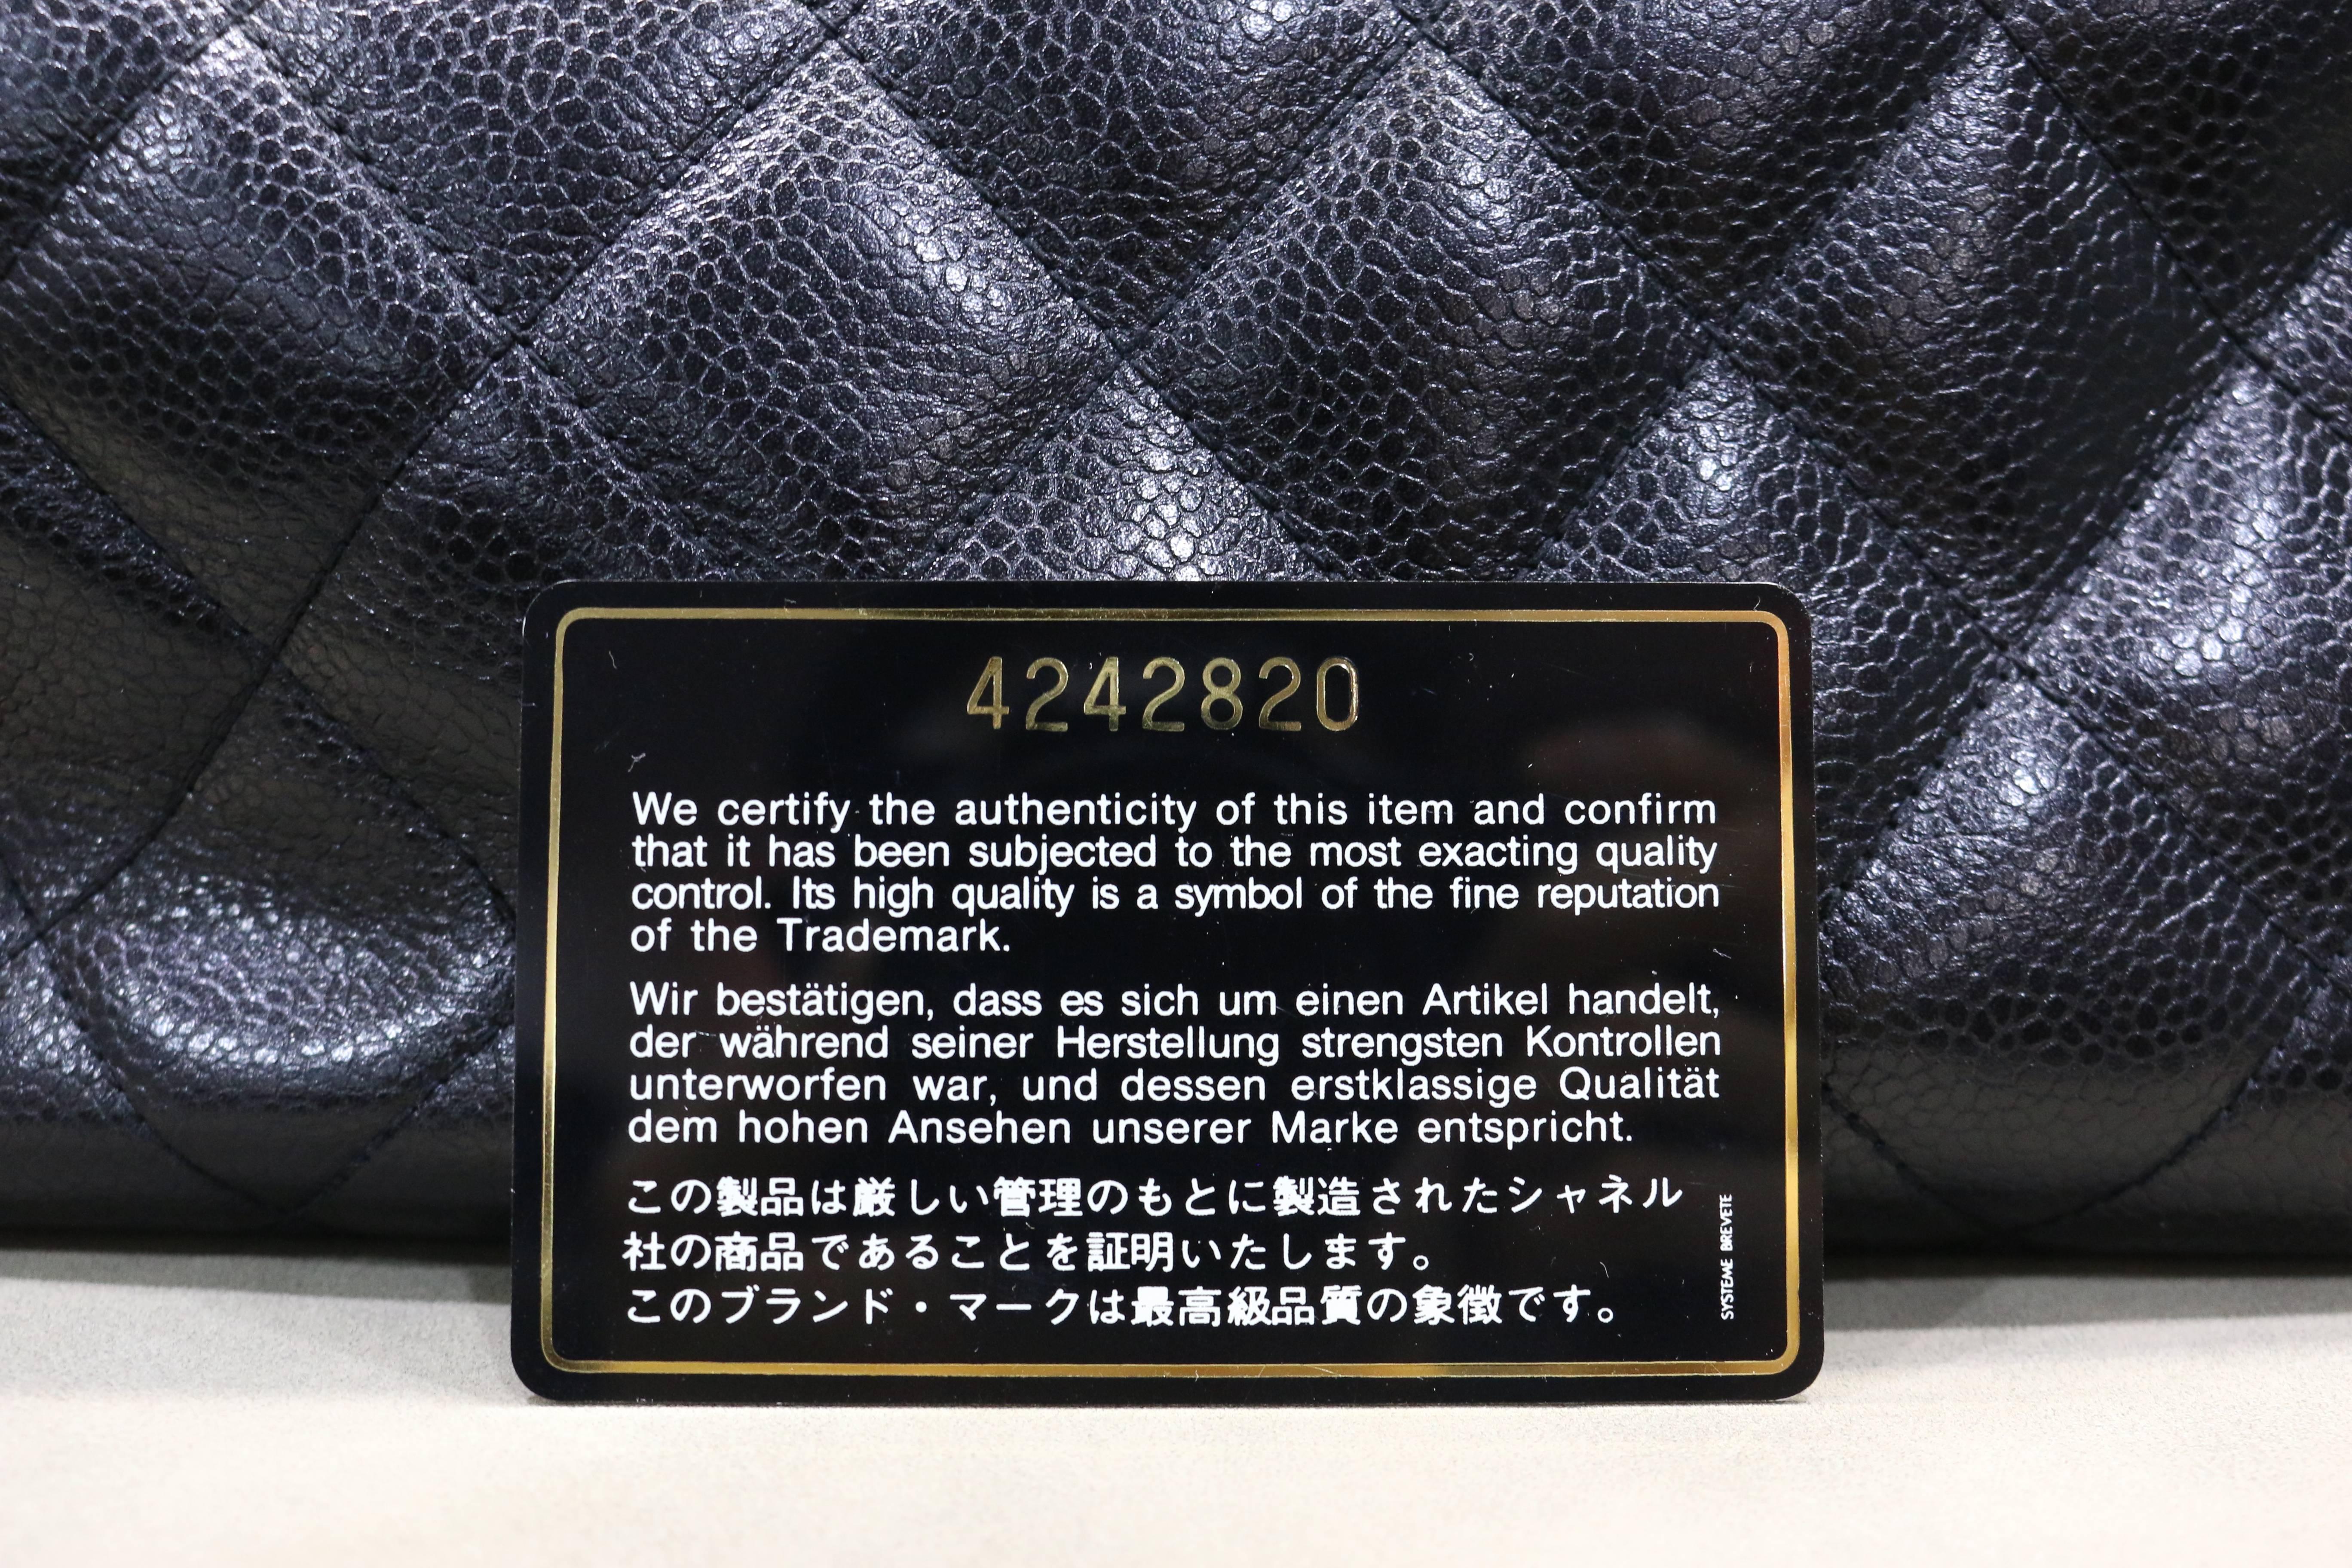 Women's Chanel Black Quilted Leather Handbag